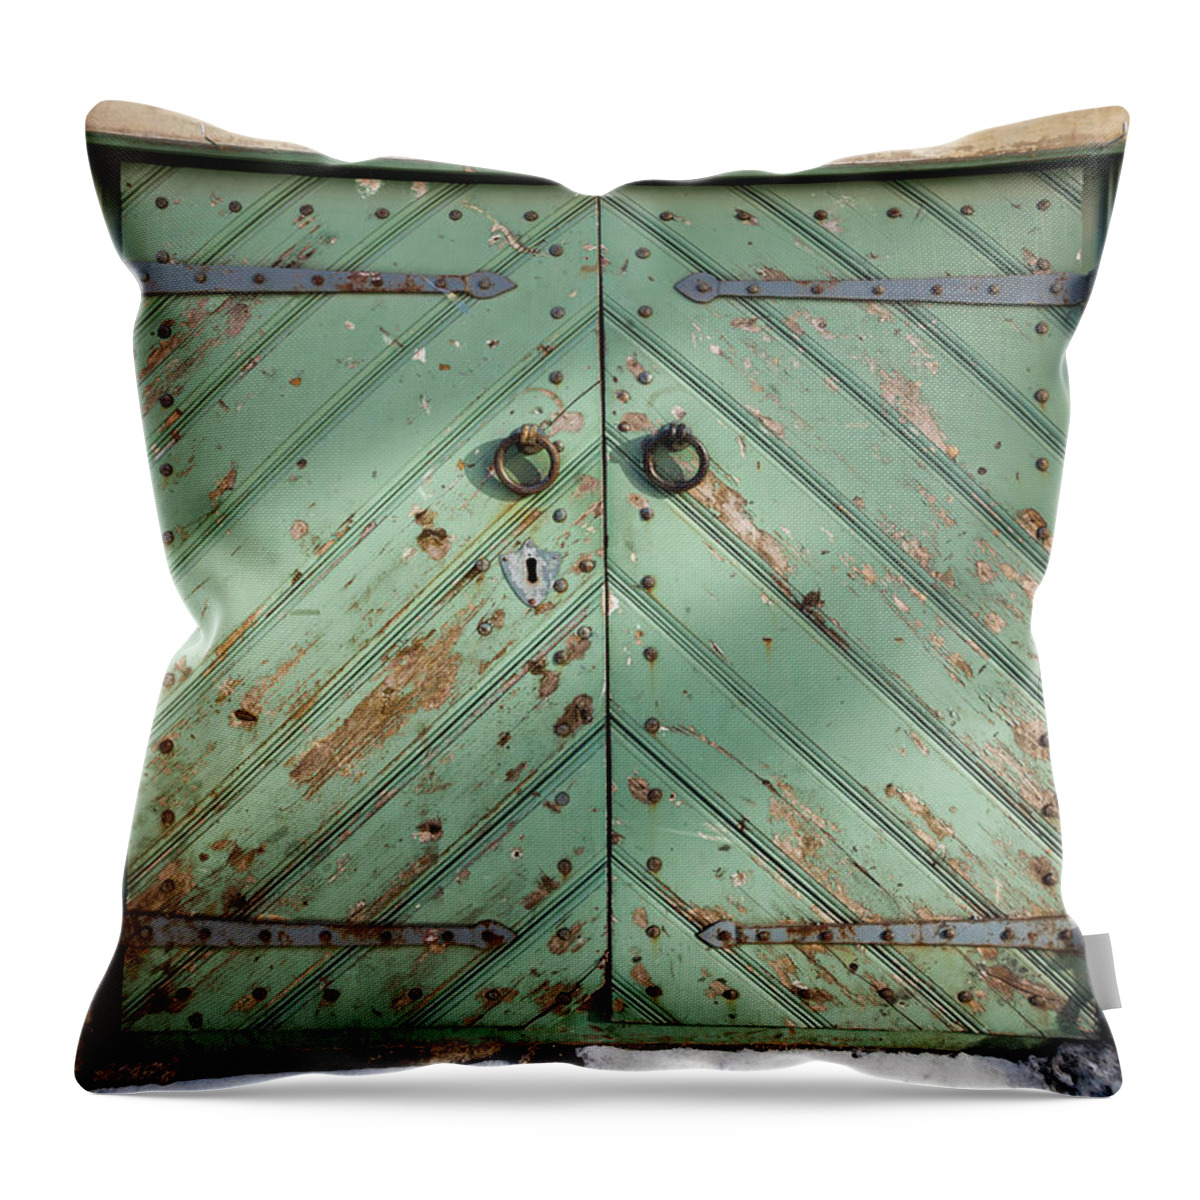 Arch Throw Pillow featuring the photograph Ancient Green Wooden Gate In Old by Eugenesergeev